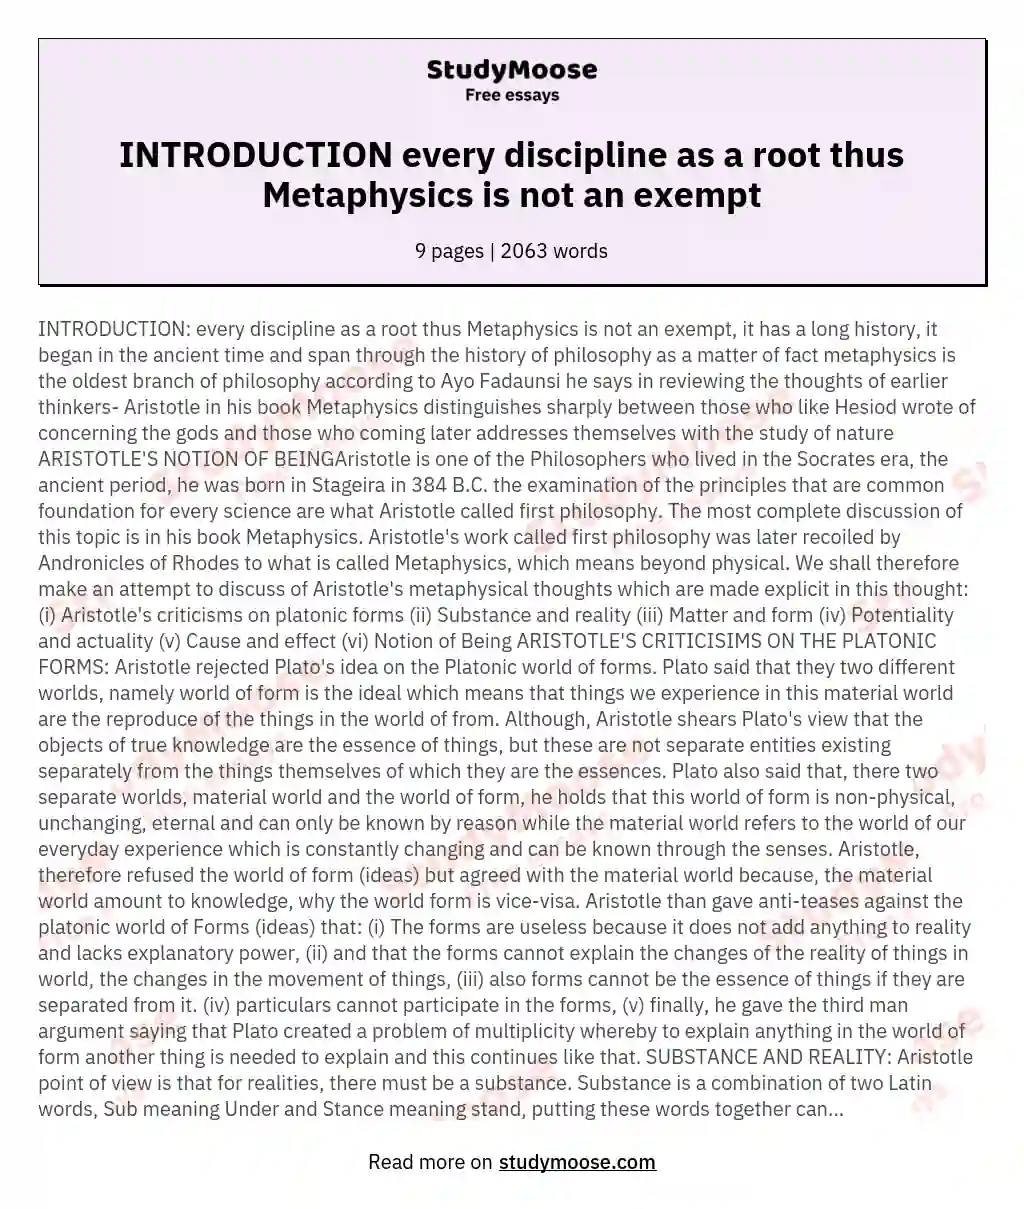 INTRODUCTION every discipline as a root thus Metaphysics is not an exempt